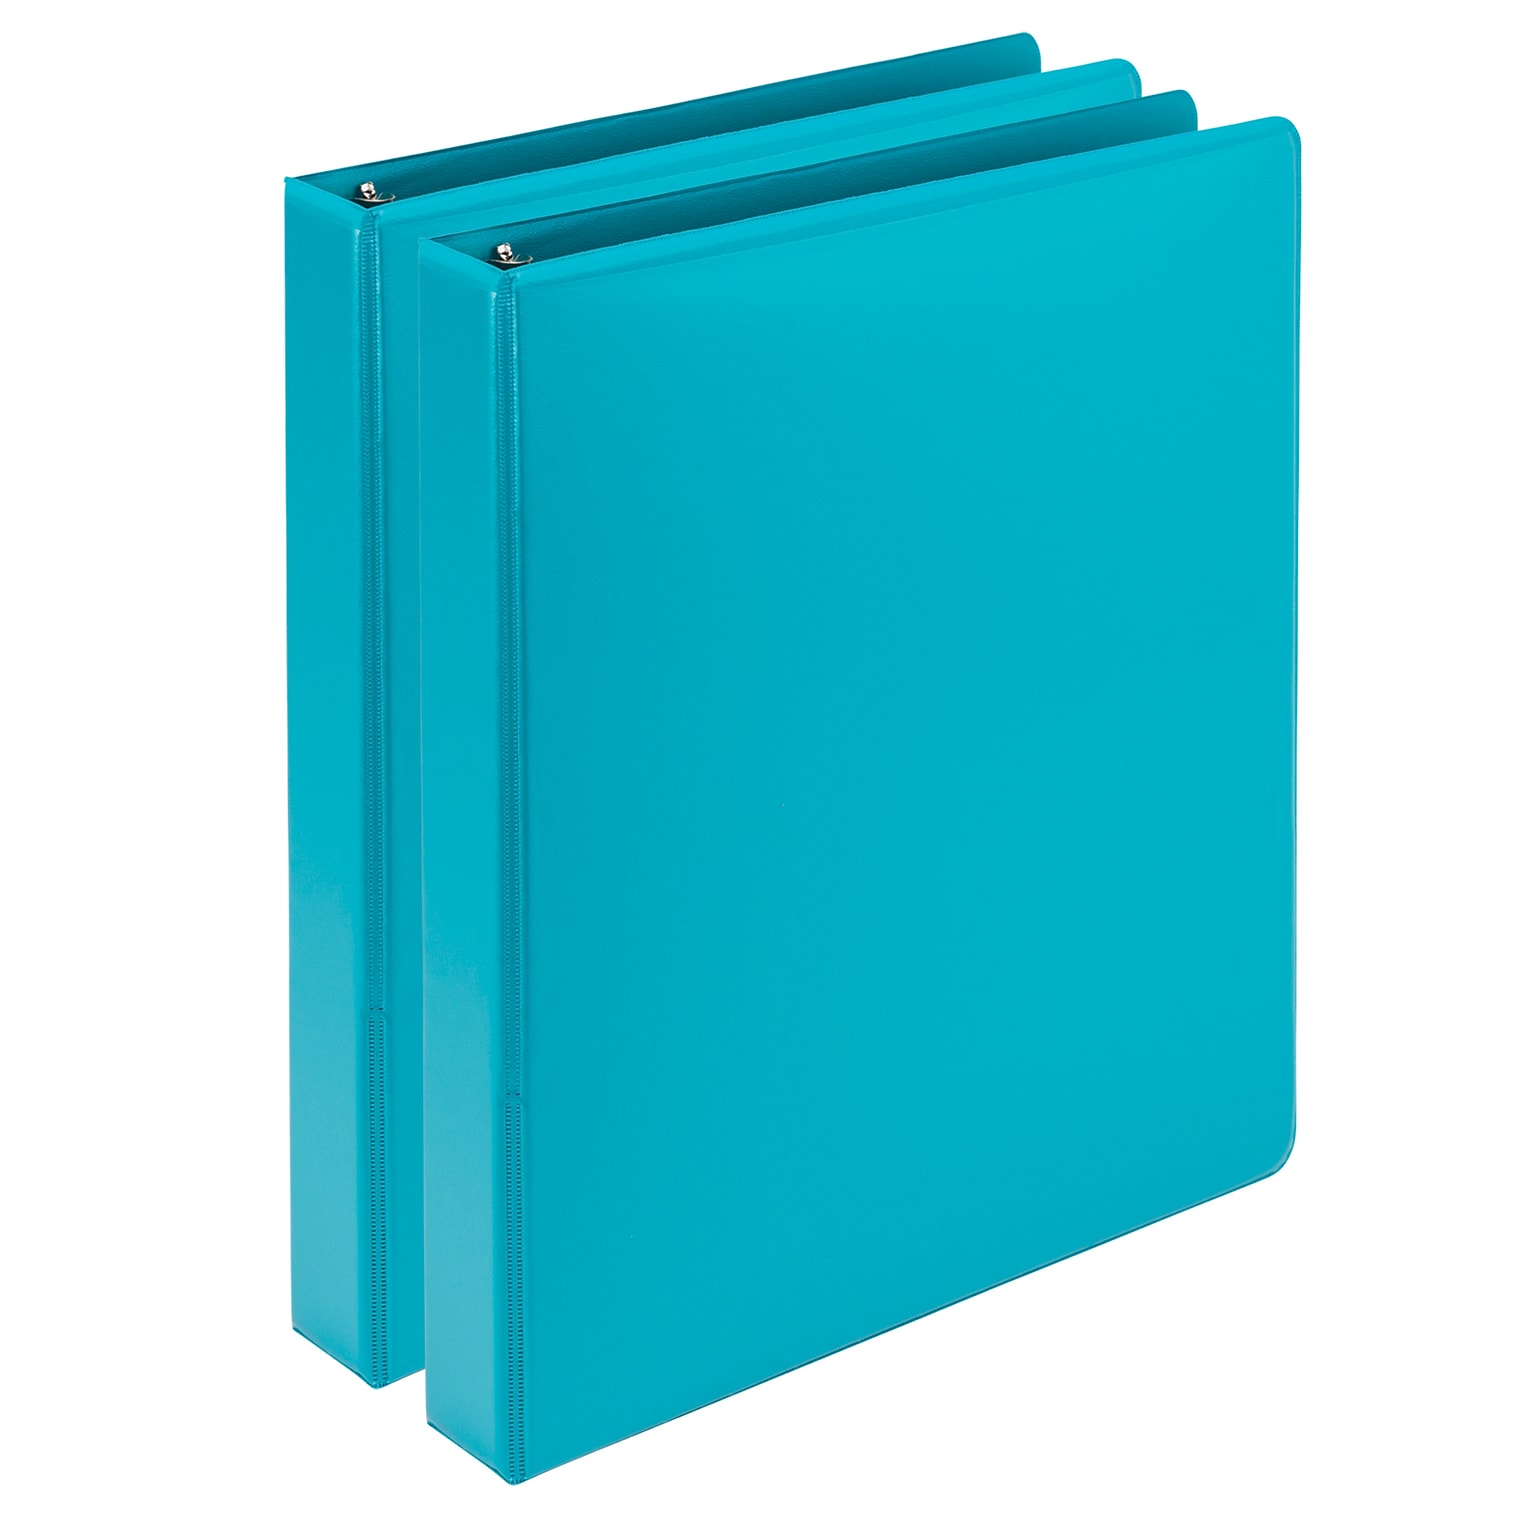 Samsill Fashion Colors 1  View Binders, 3-Ring, Made in USA, Teal, 2/Pack (U86377)